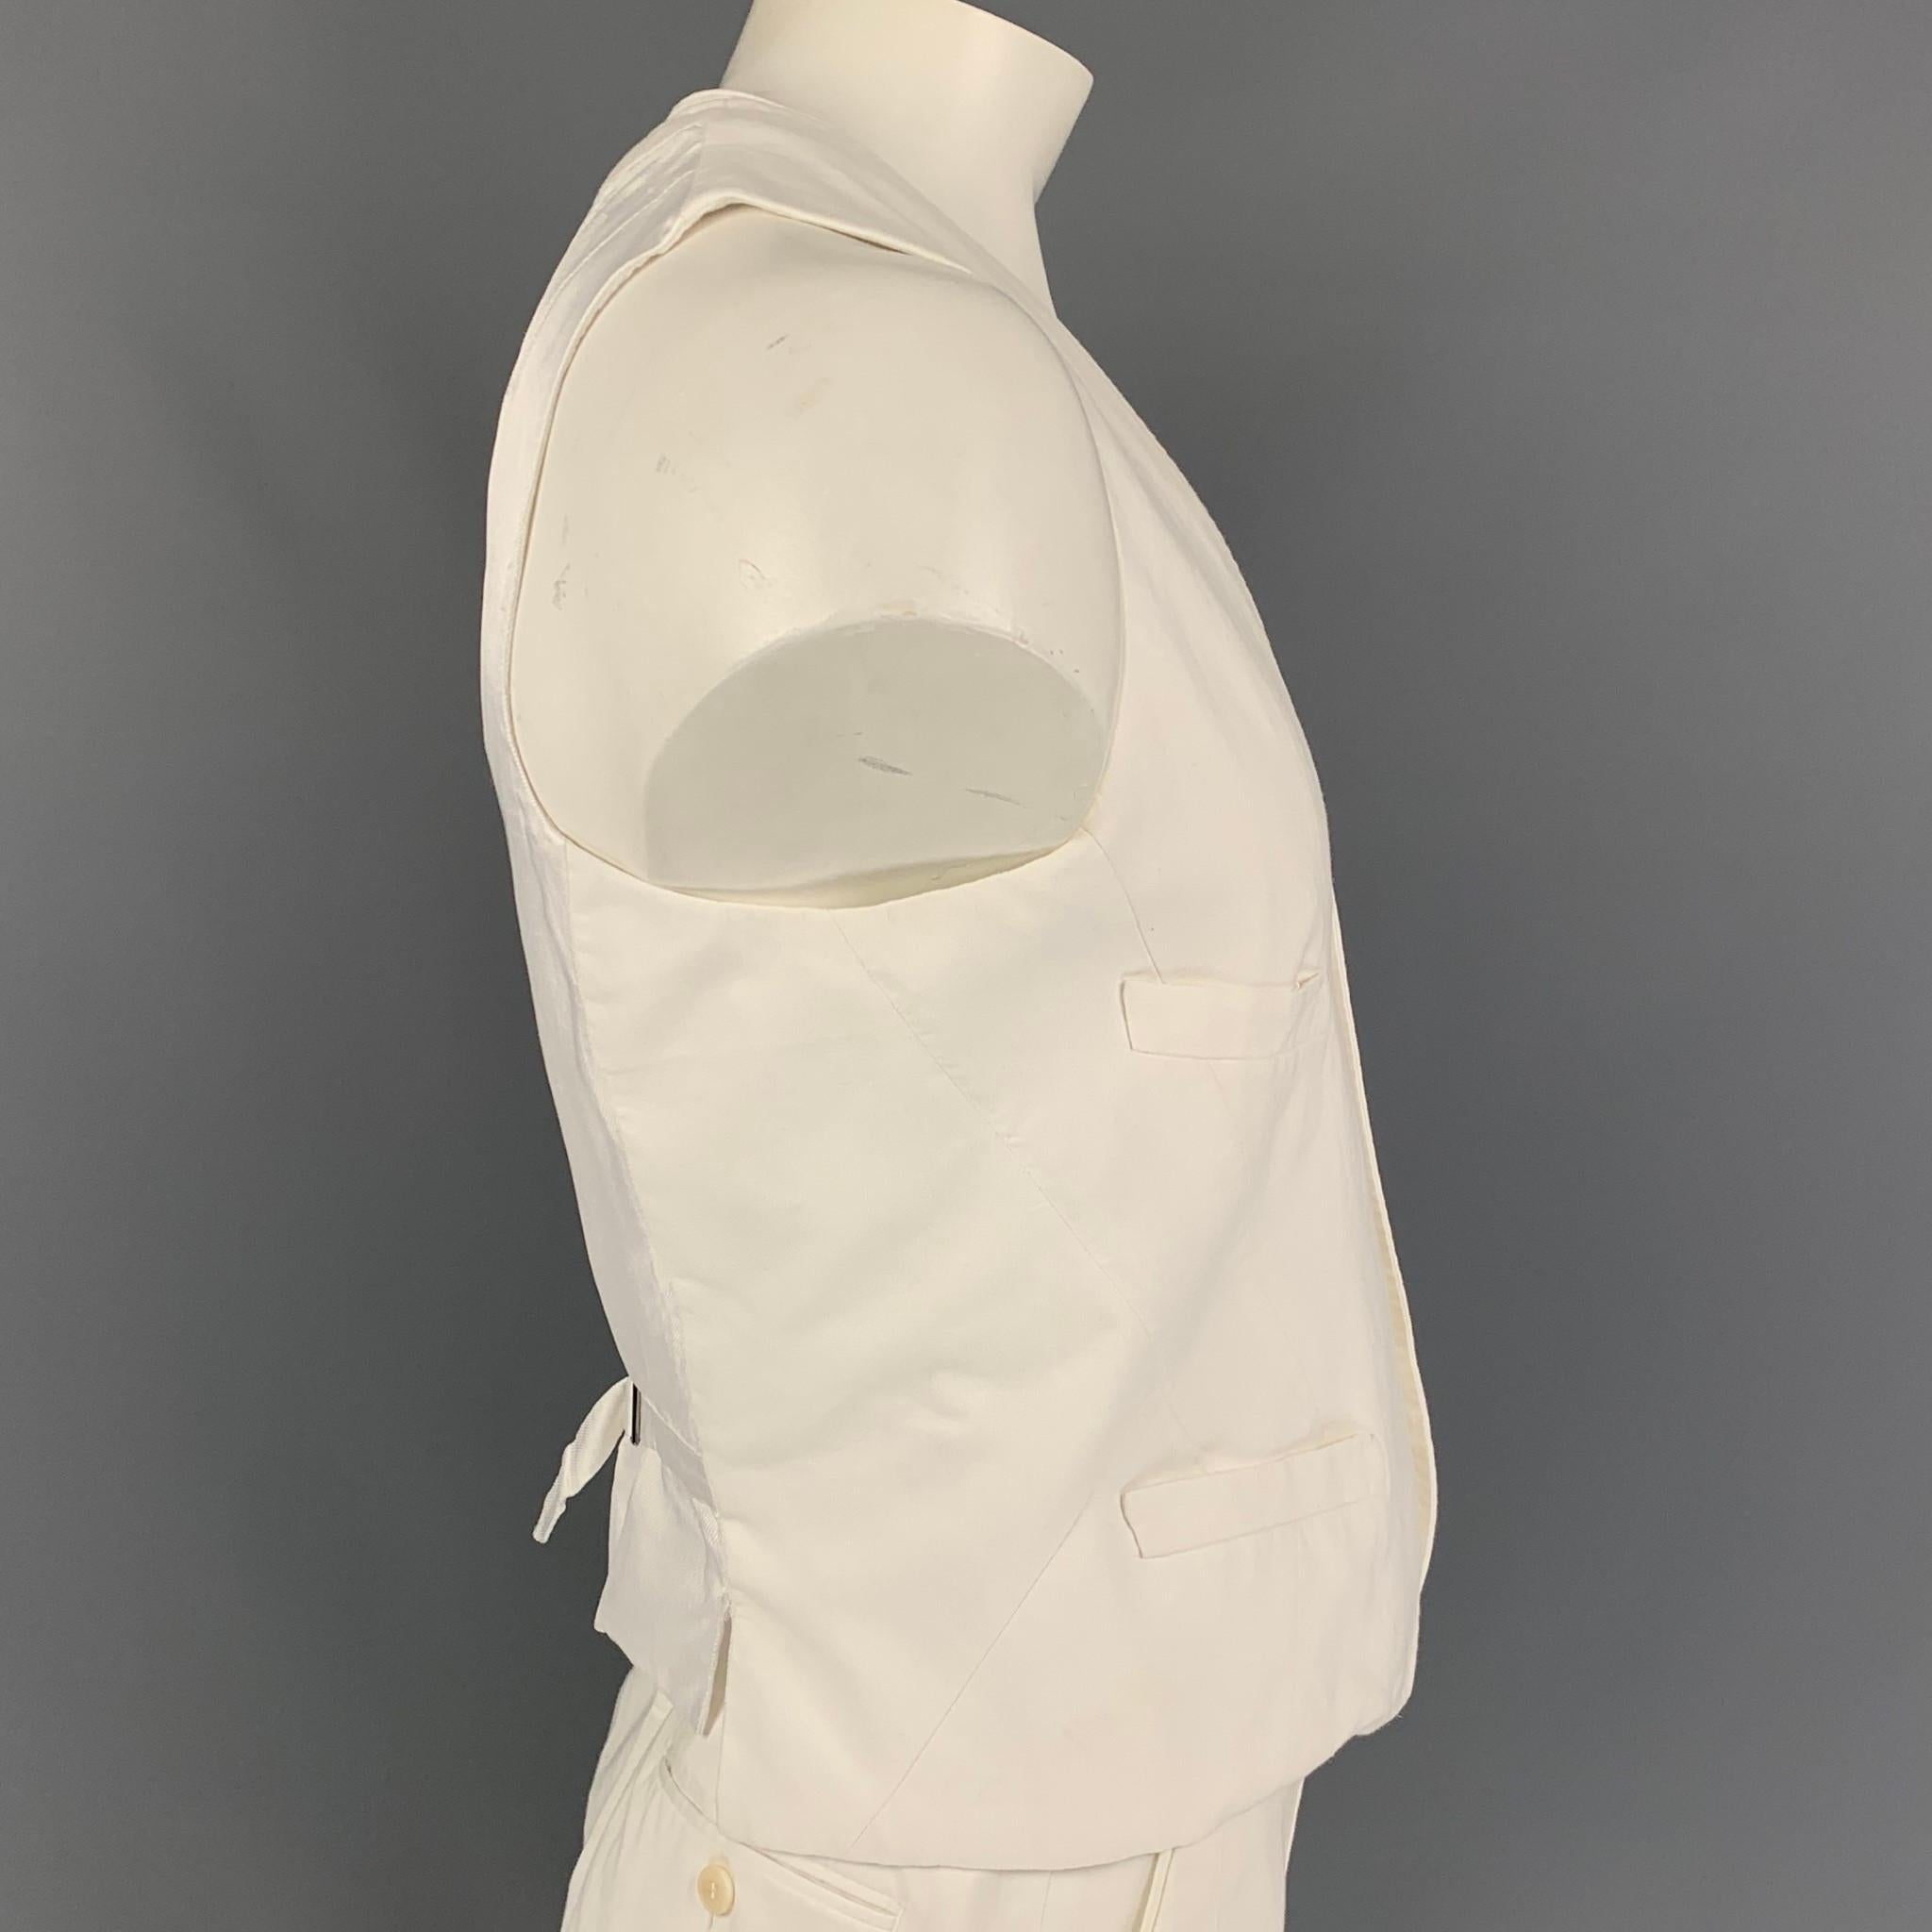 NEIL BARRETT vest comes in a white cotton / linen featuring a detachable strap detail, back belt, slit pockets, and a buttoned closure. Made in Italy. 

Very Good Pre-Owned Condition.
Marked: XL

Measurements:

Shoulder: 13.5 in.
Chest: 40